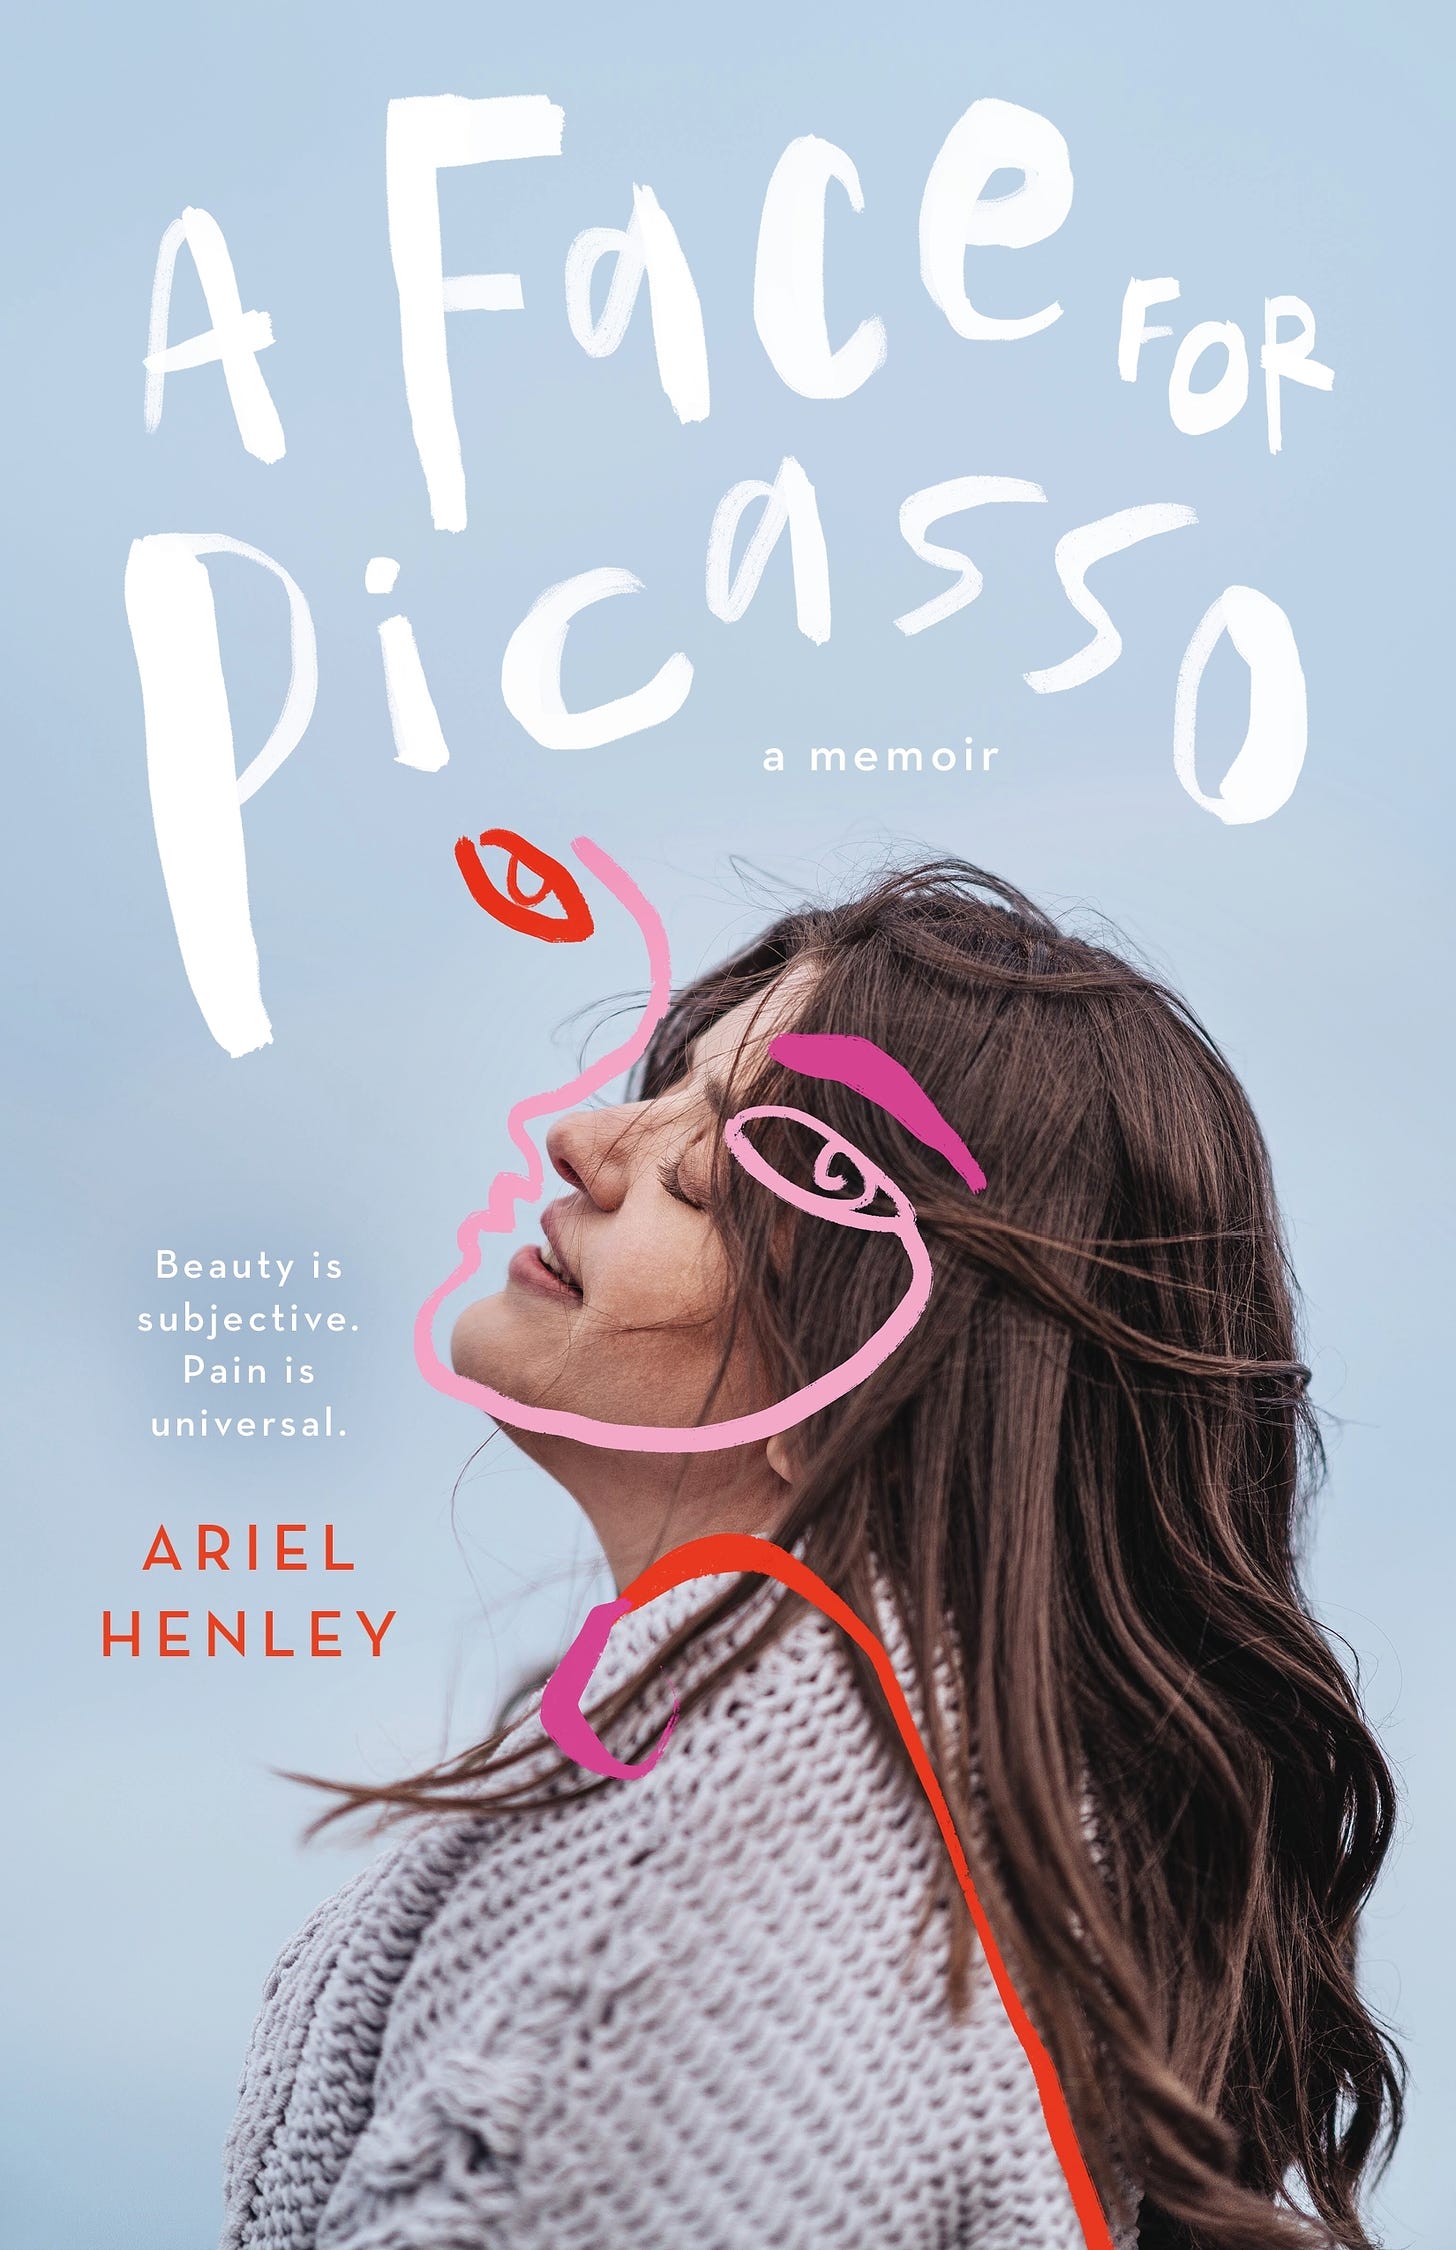 Book cover for “A Face for Picasso: Coming of Age with Crouzon Syndrome” a memoir by Ariel Henley. The background is pale blue gray with a photo of Ariel, a young white woman with long tousled brown hair standing in profile with her head tilted upwards and her eyes closed with a look of bliss. Superimposed over Ariel’s face is a drawing of a face in the style of Pablo Picasso of two eyes, a nose and face. Small text on the left reads, “Beauty is subjective. Pain is universal.” Book cover designed by Aurora Parlagreco, photo credit Paul Ngo. Courtesy of Macmillan.